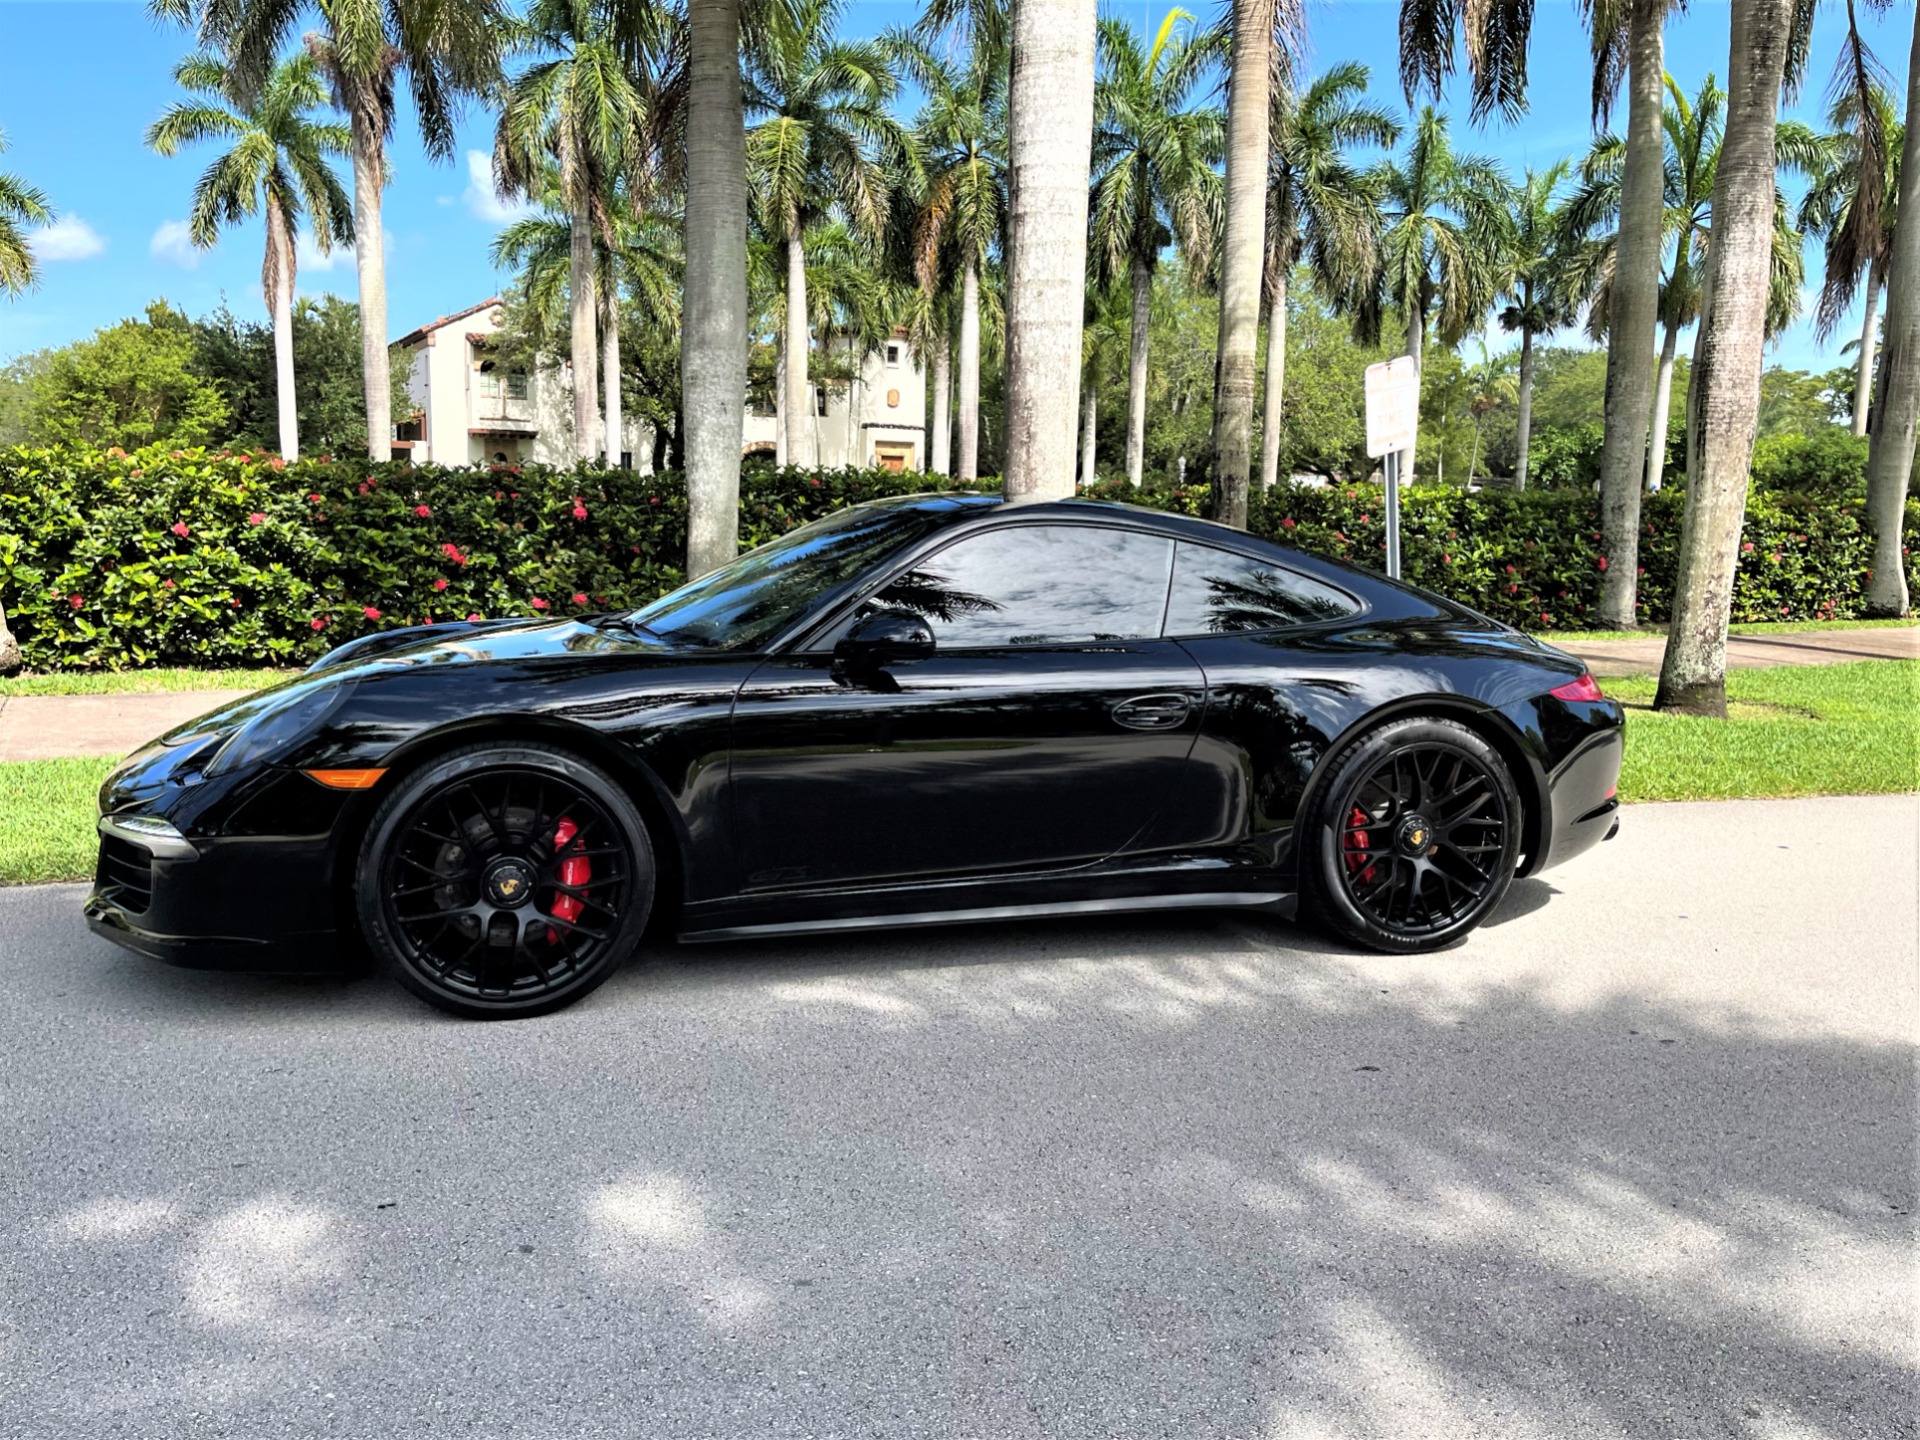 Used 2016 Porsche 911 Carrera 4 GTS for sale $119,850 at The Gables Sports Cars in Miami FL 33146 3